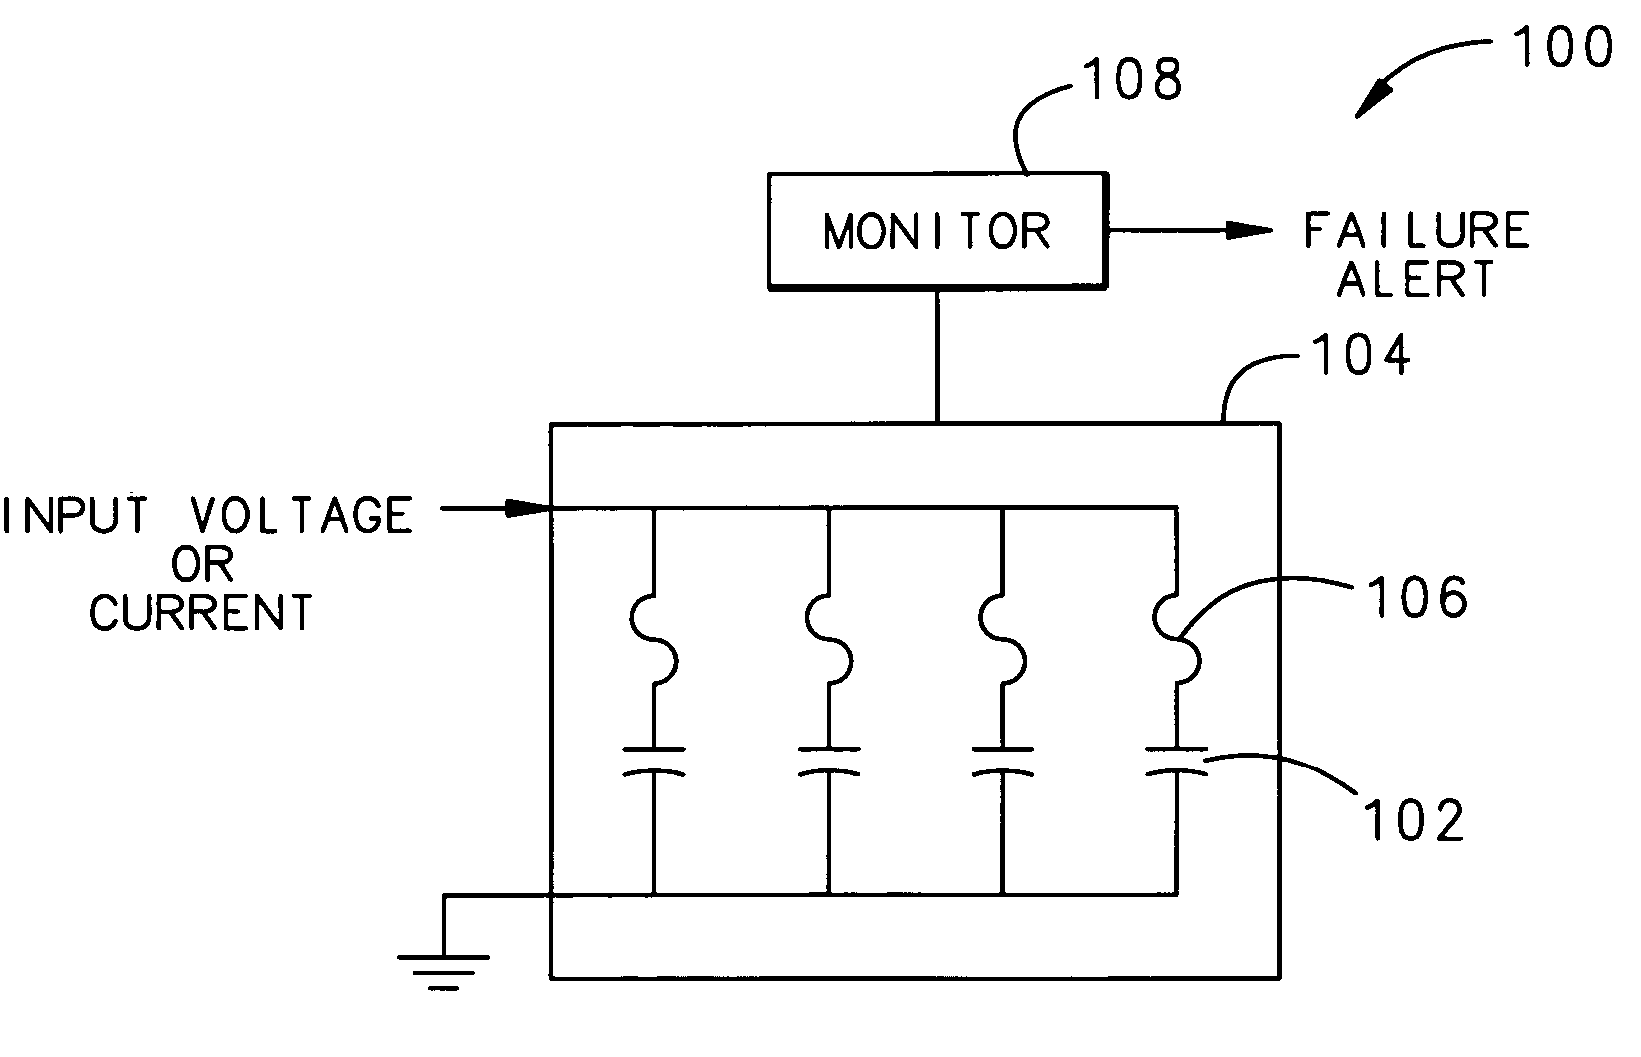 Circuit health monitoring system and method